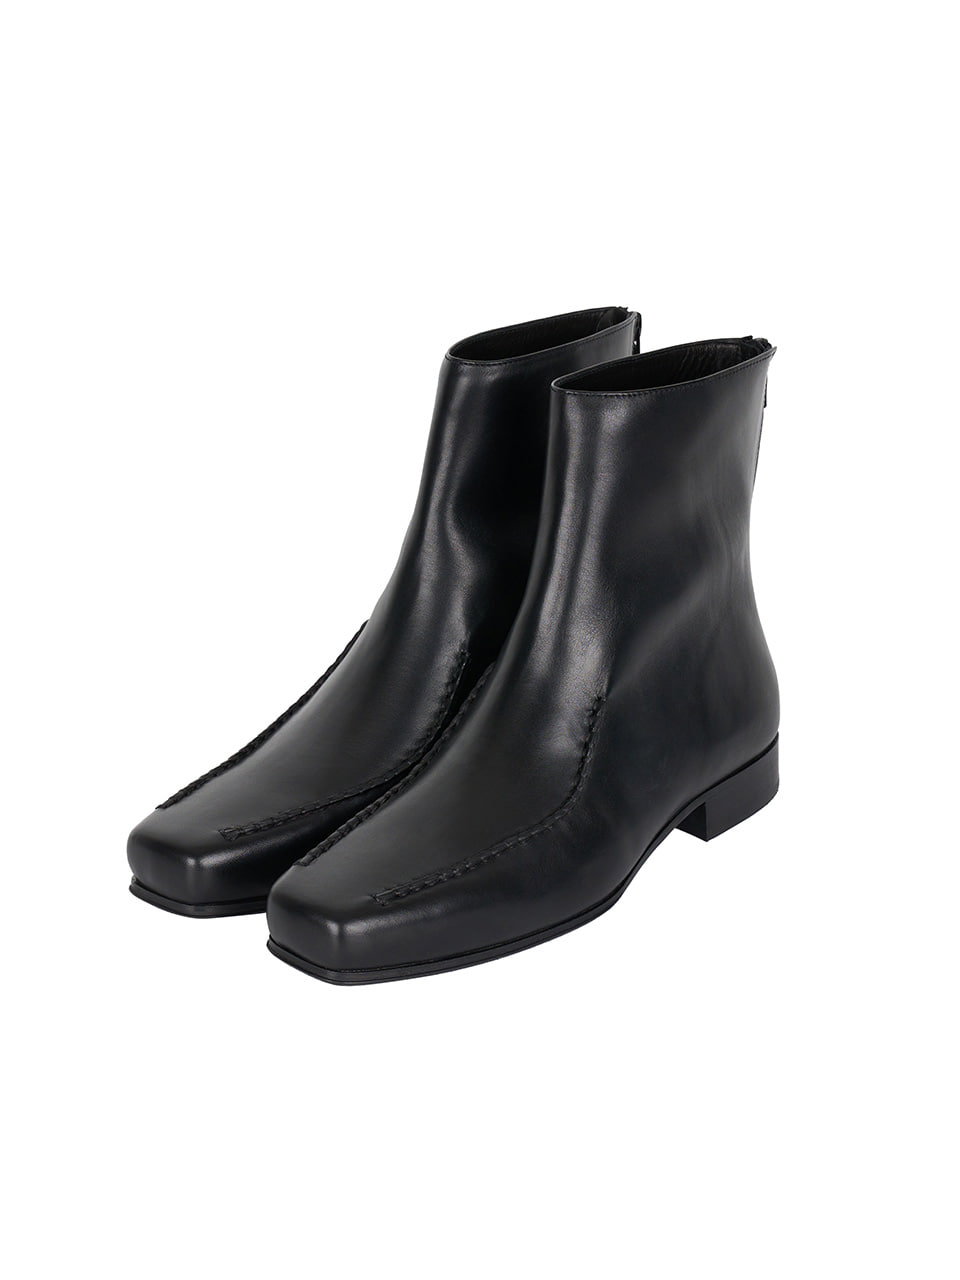 SEFR - LEATHER LUCKY ANKLE BOOTS (BLACK)